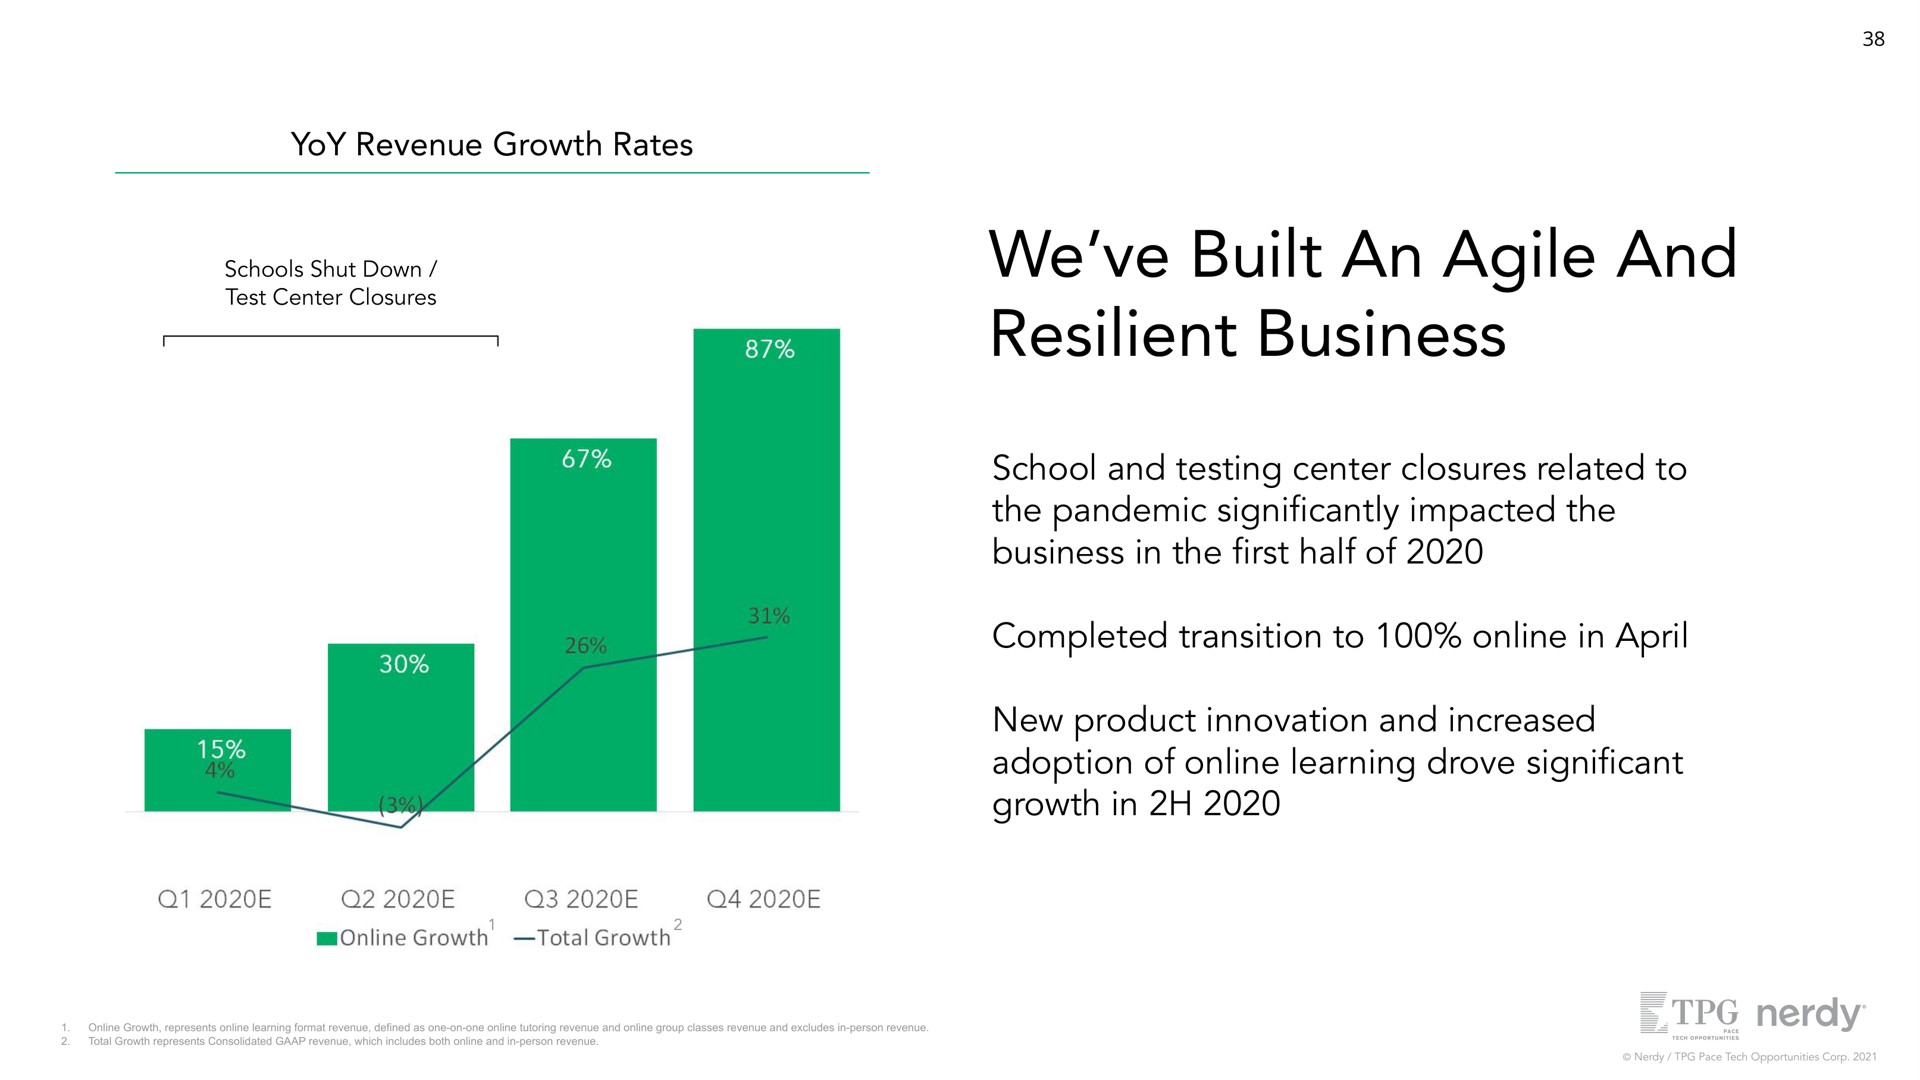 yoy revenue growth rates schools shut down test center closures we built an agile and resilient business school and testing center closures related to the pandemic impacted the business in the half of completed transition to in new product innovation and increased adoption of learning drove cant growth in | Nerdy